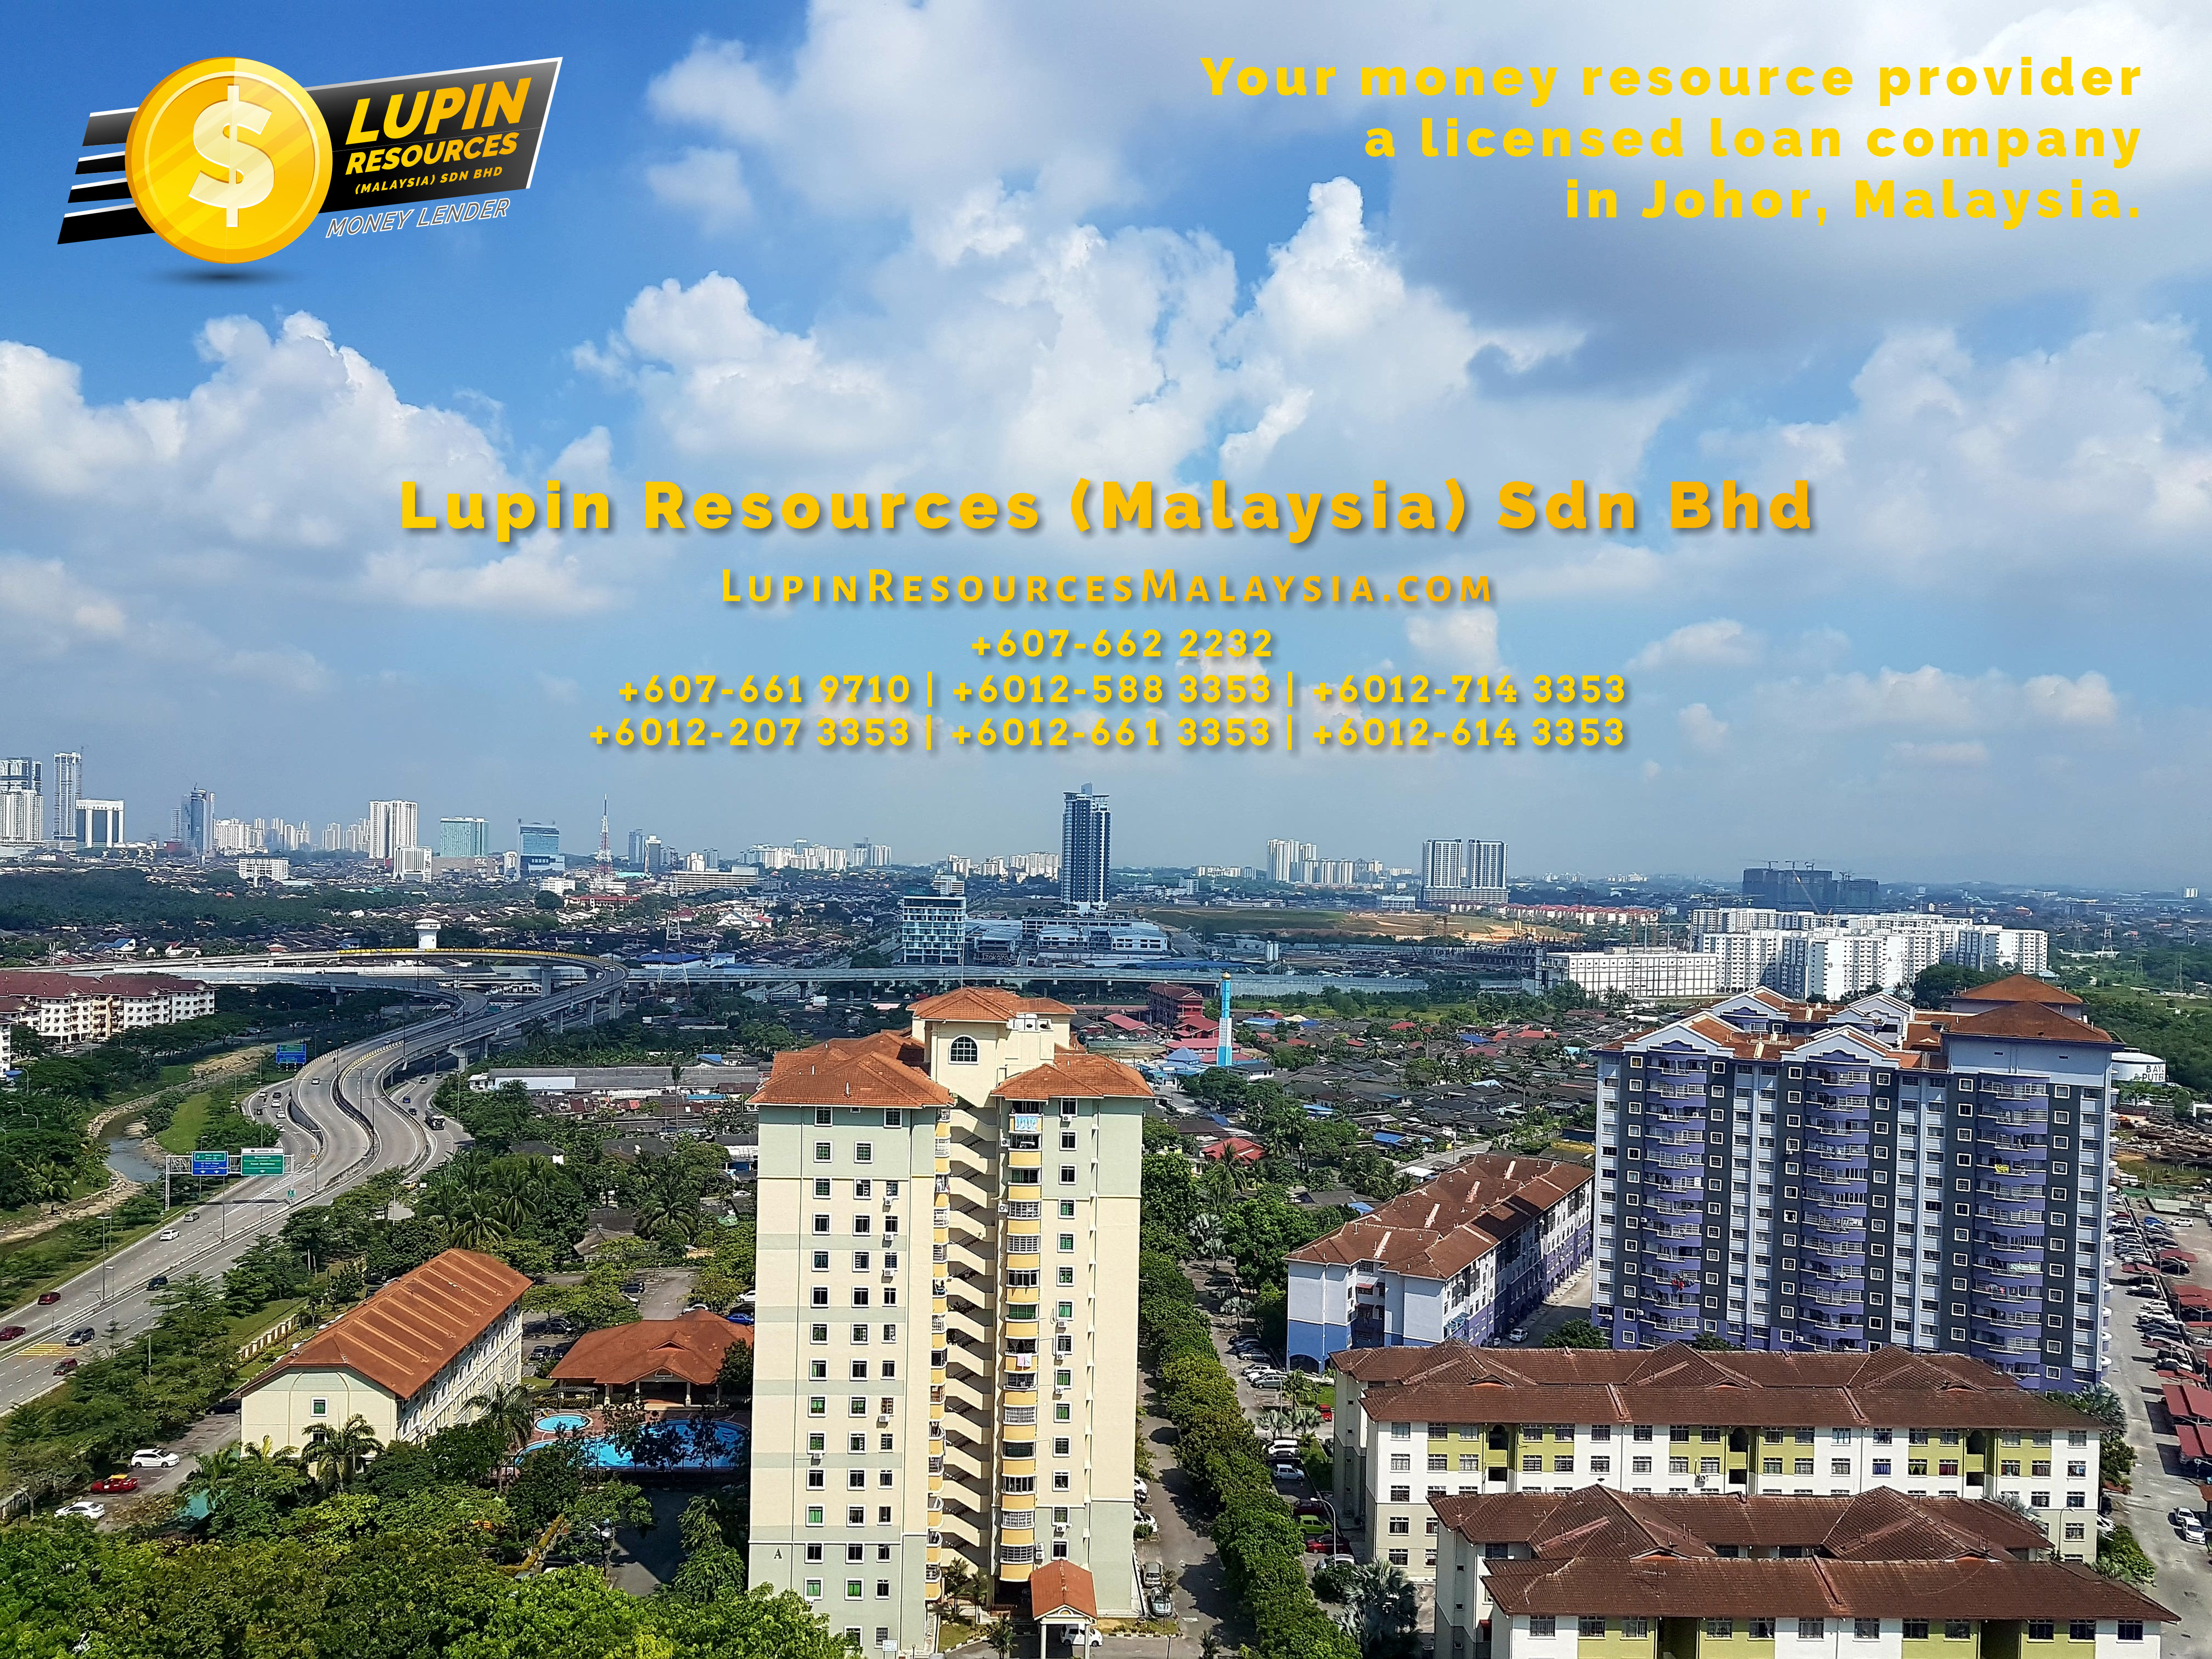 Johor Licensed Loan Company Licensed Money Lender Lupin Resources Malaysia SDN BHD Your money resource provider Kulai Johor Bahru Johor Malaysia Business Loan A01-80